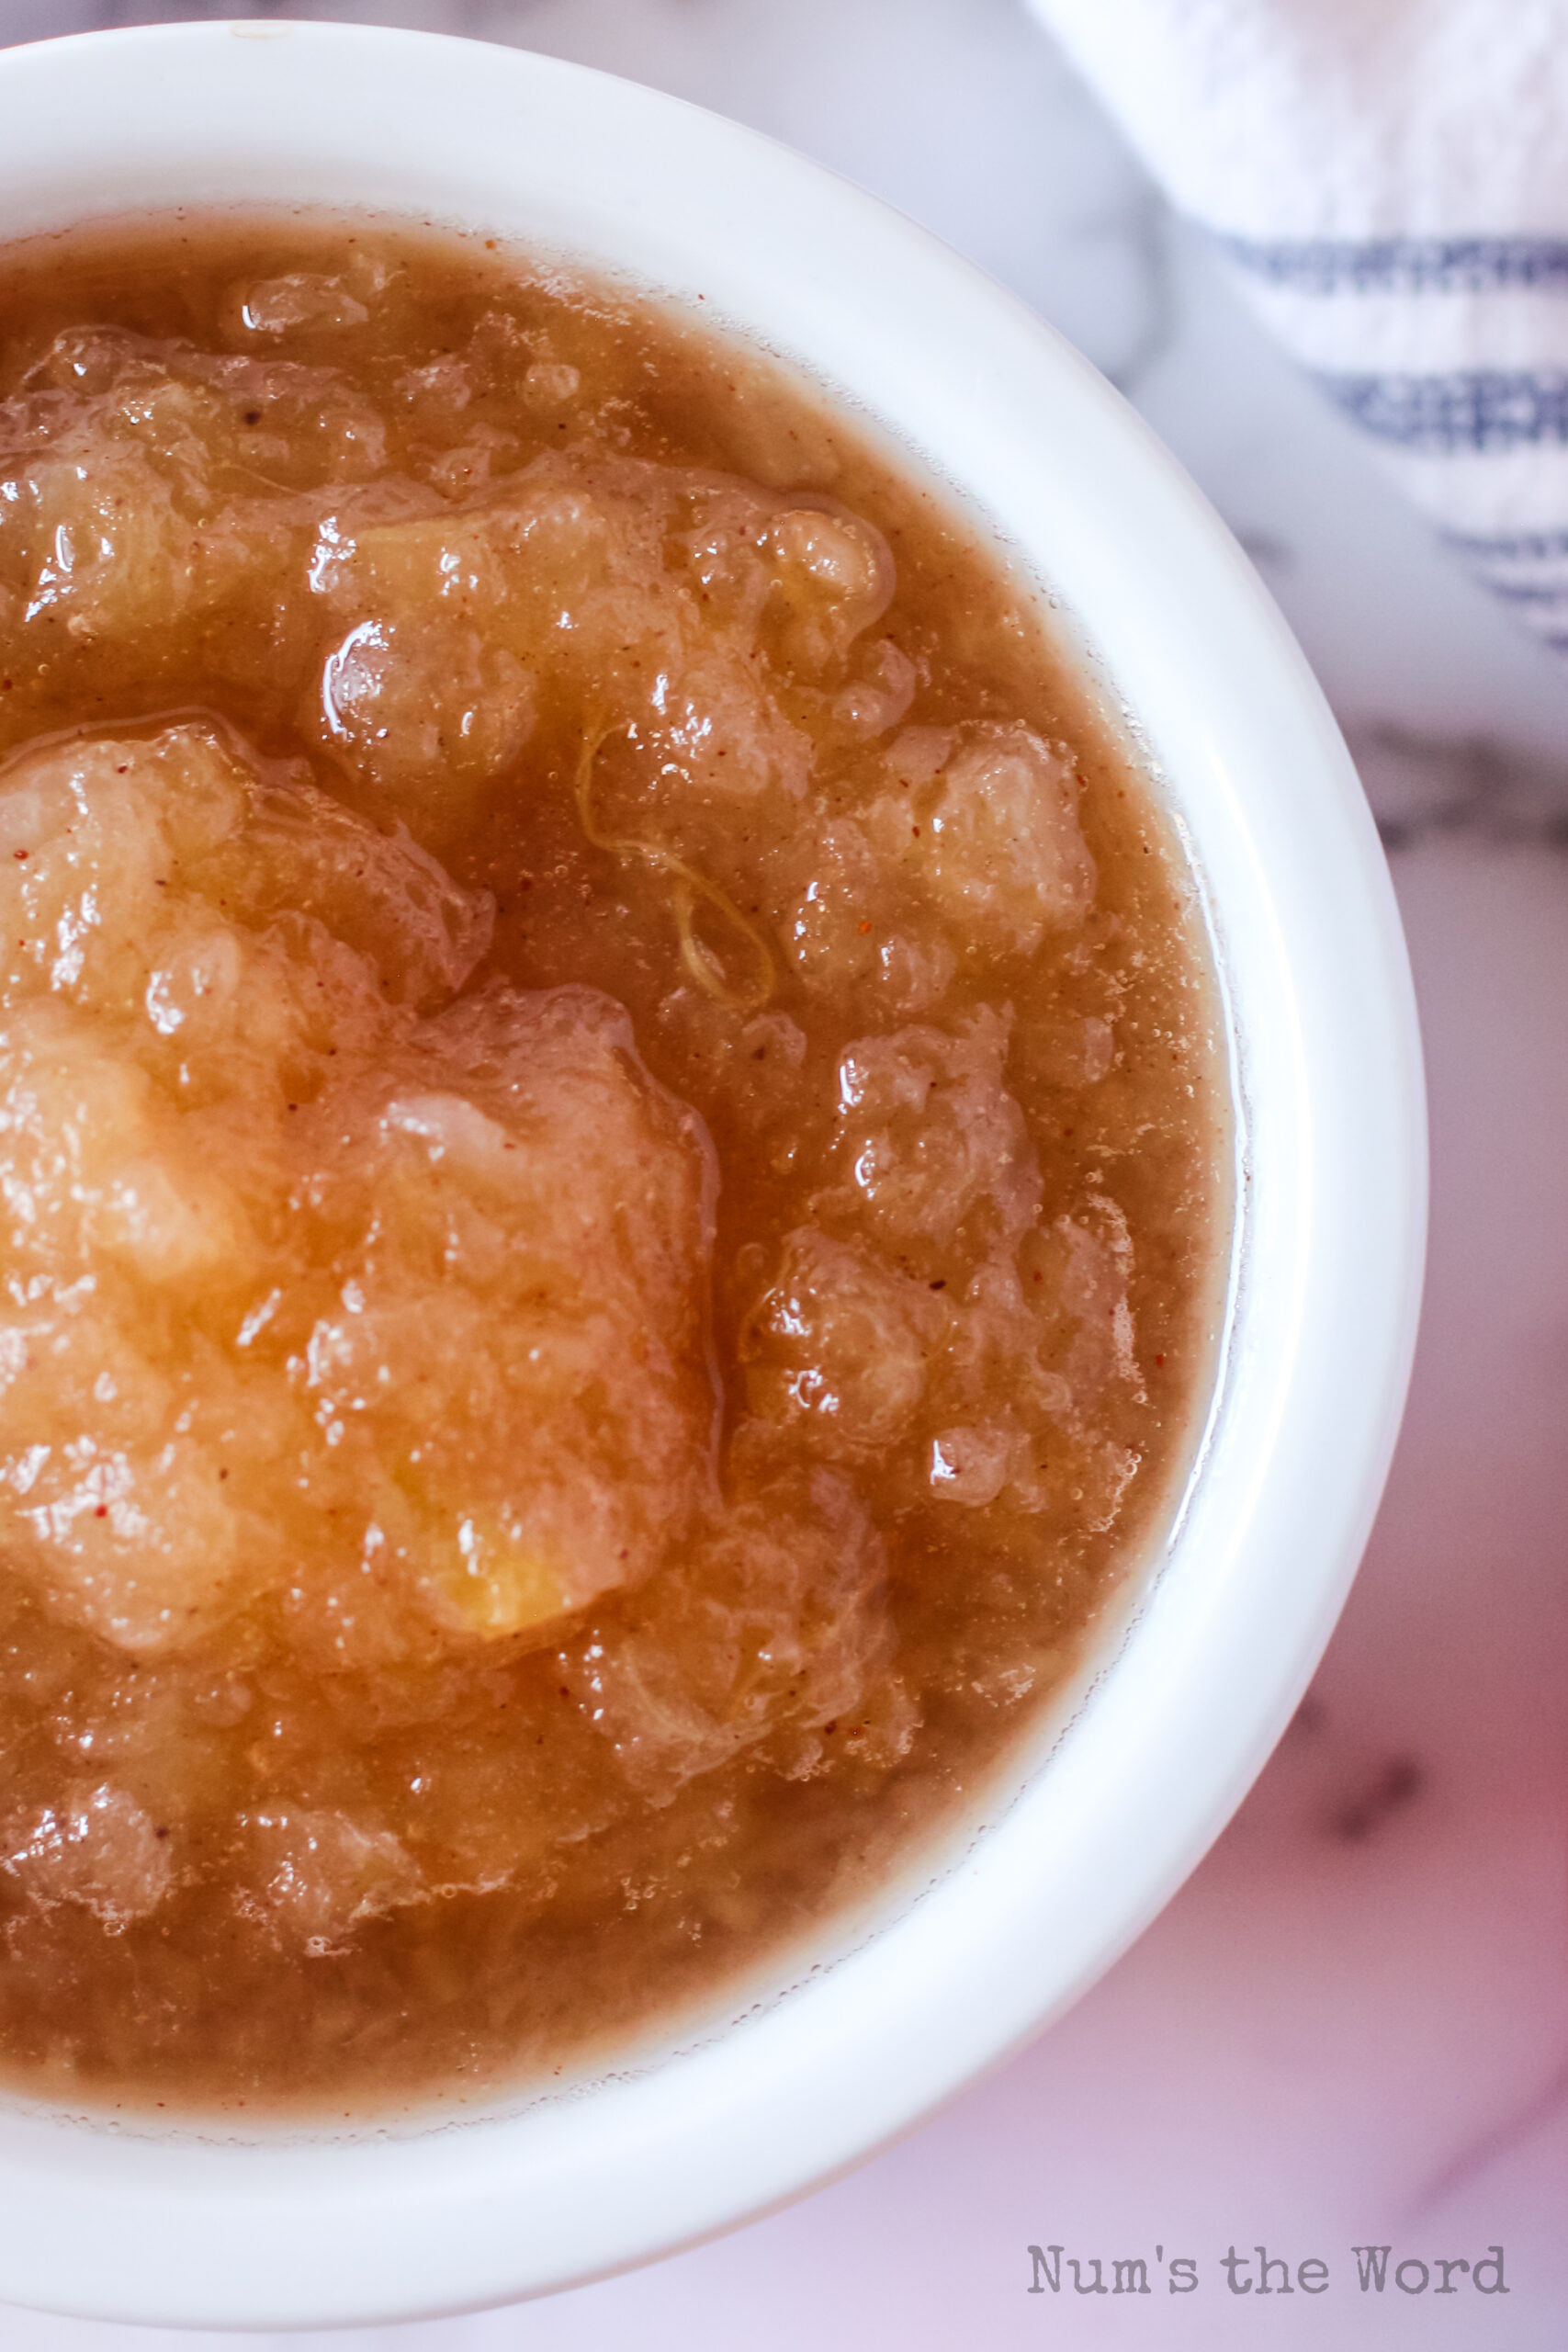 zoomed in image of applesauce in bowl ready to eat